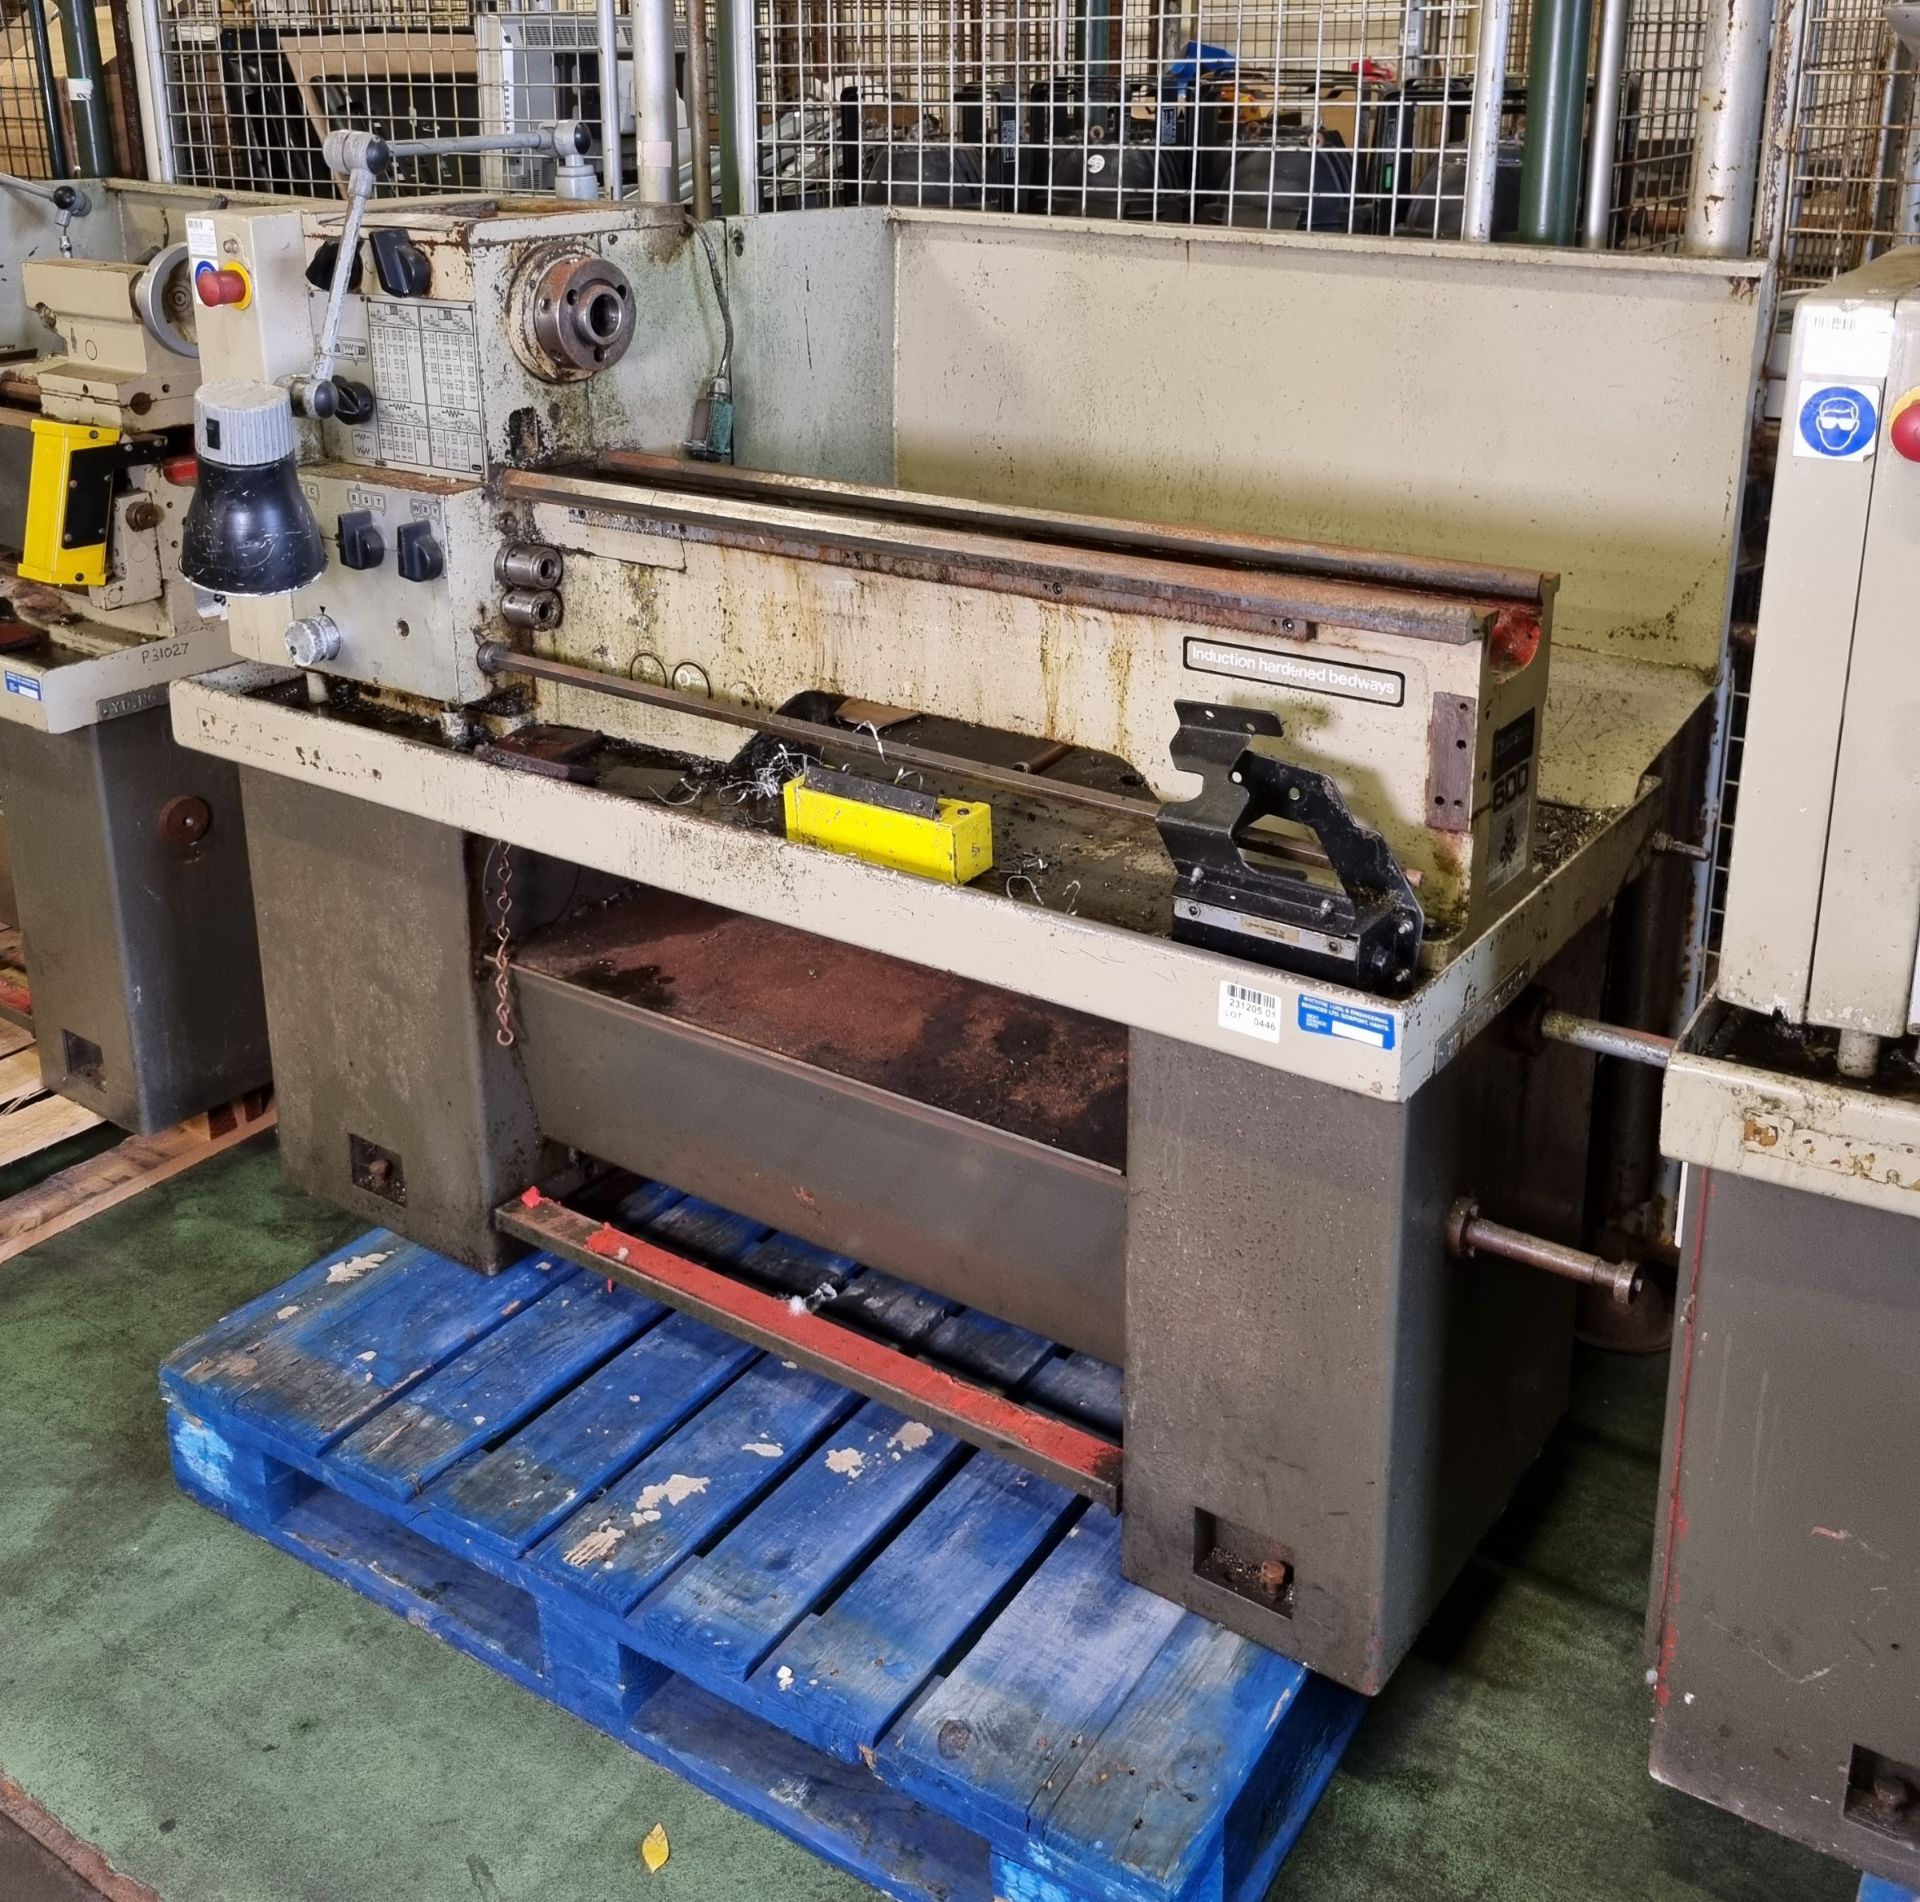 Harrison M300 bench lathe - W 1700 x D 1000 x H 1250mm - MISSING TAIL STOCK, CROSS SLIDE, GAP BED - Image 3 of 5